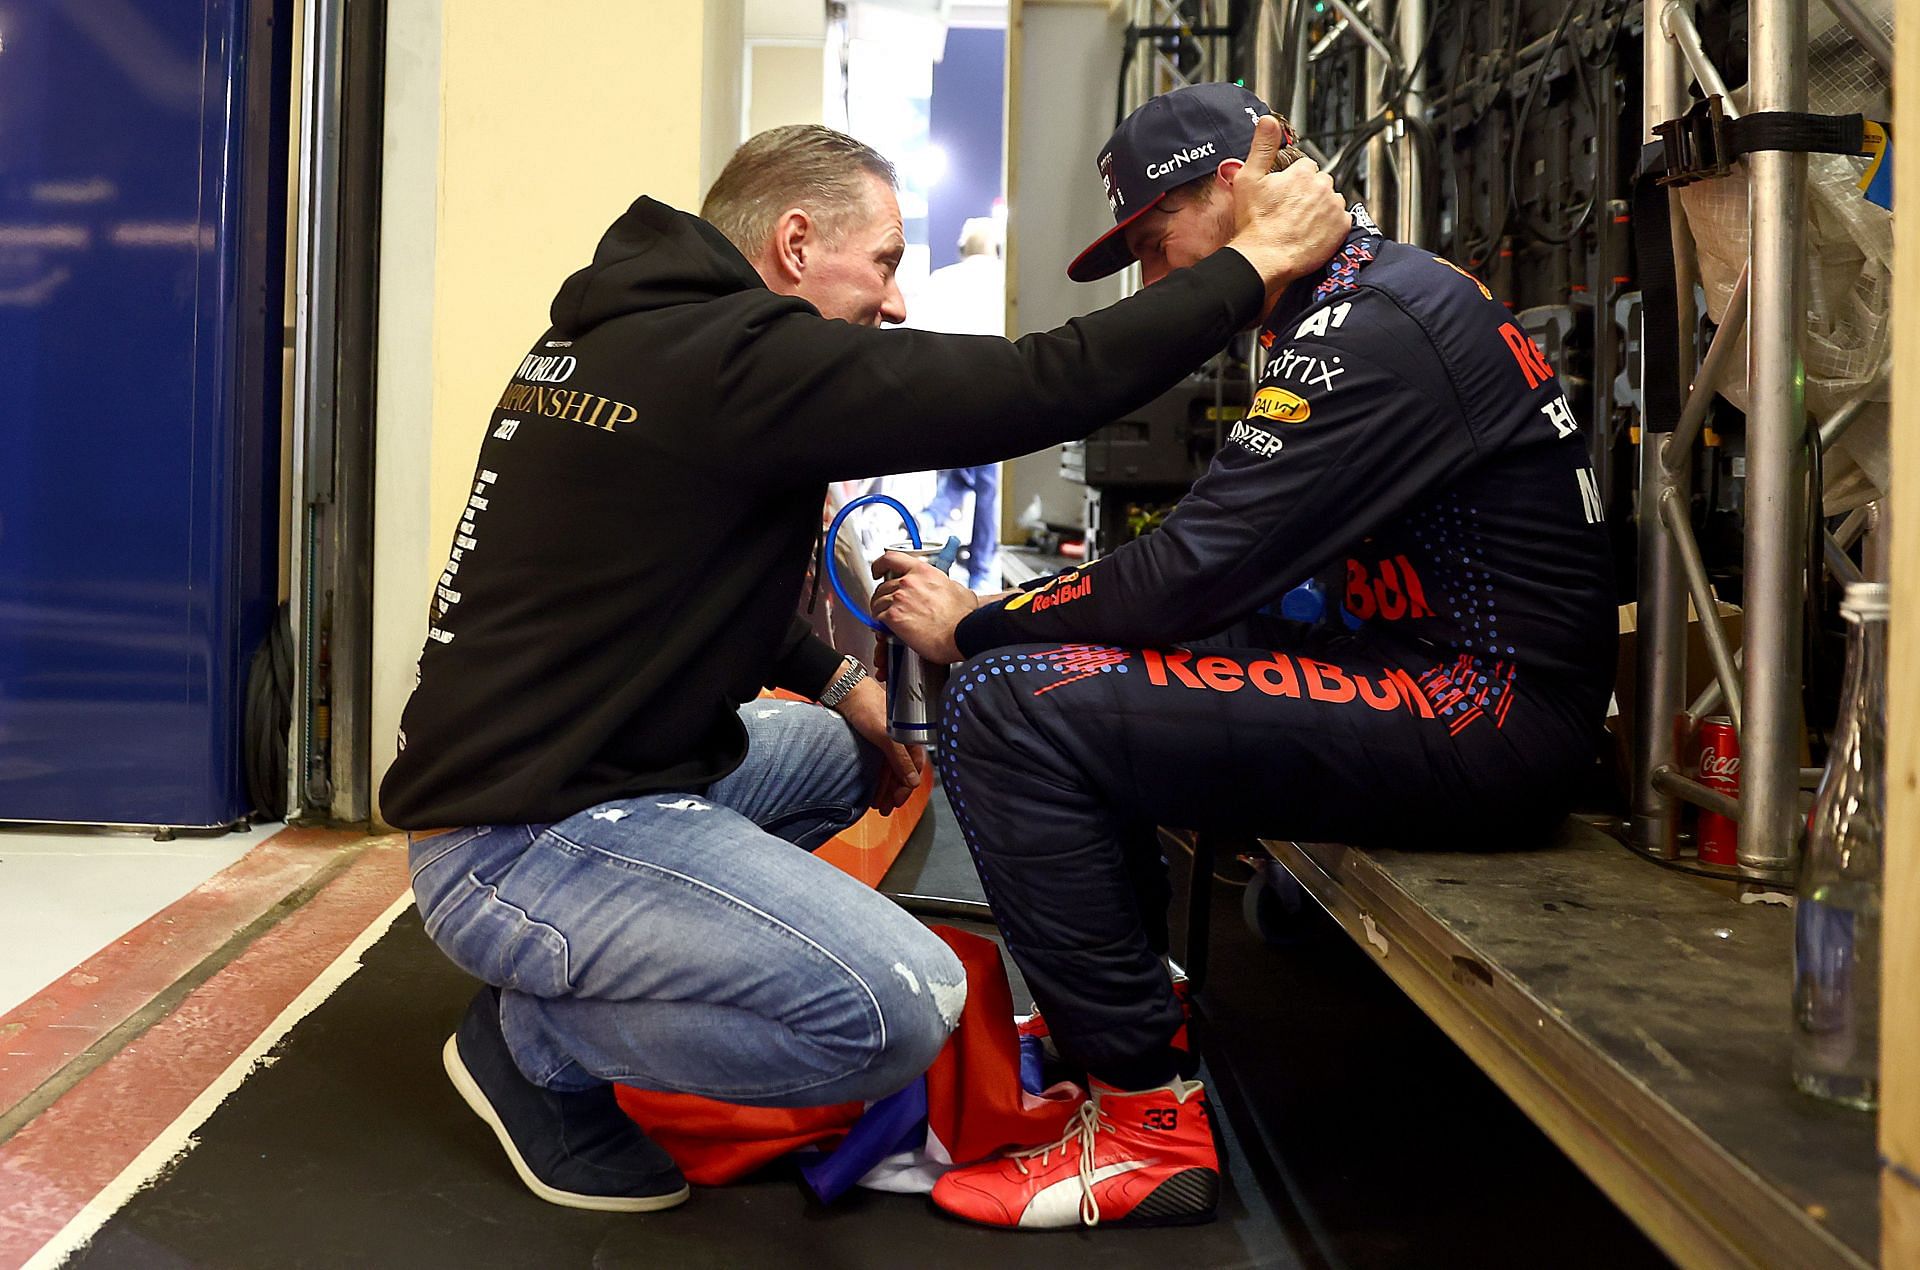 Max Verstappen (R) with his father Jos Verstappen at the Parc Ferme after becoming the 2021 F1 world champion. (Photo by Mark Thompson/Getty Images)